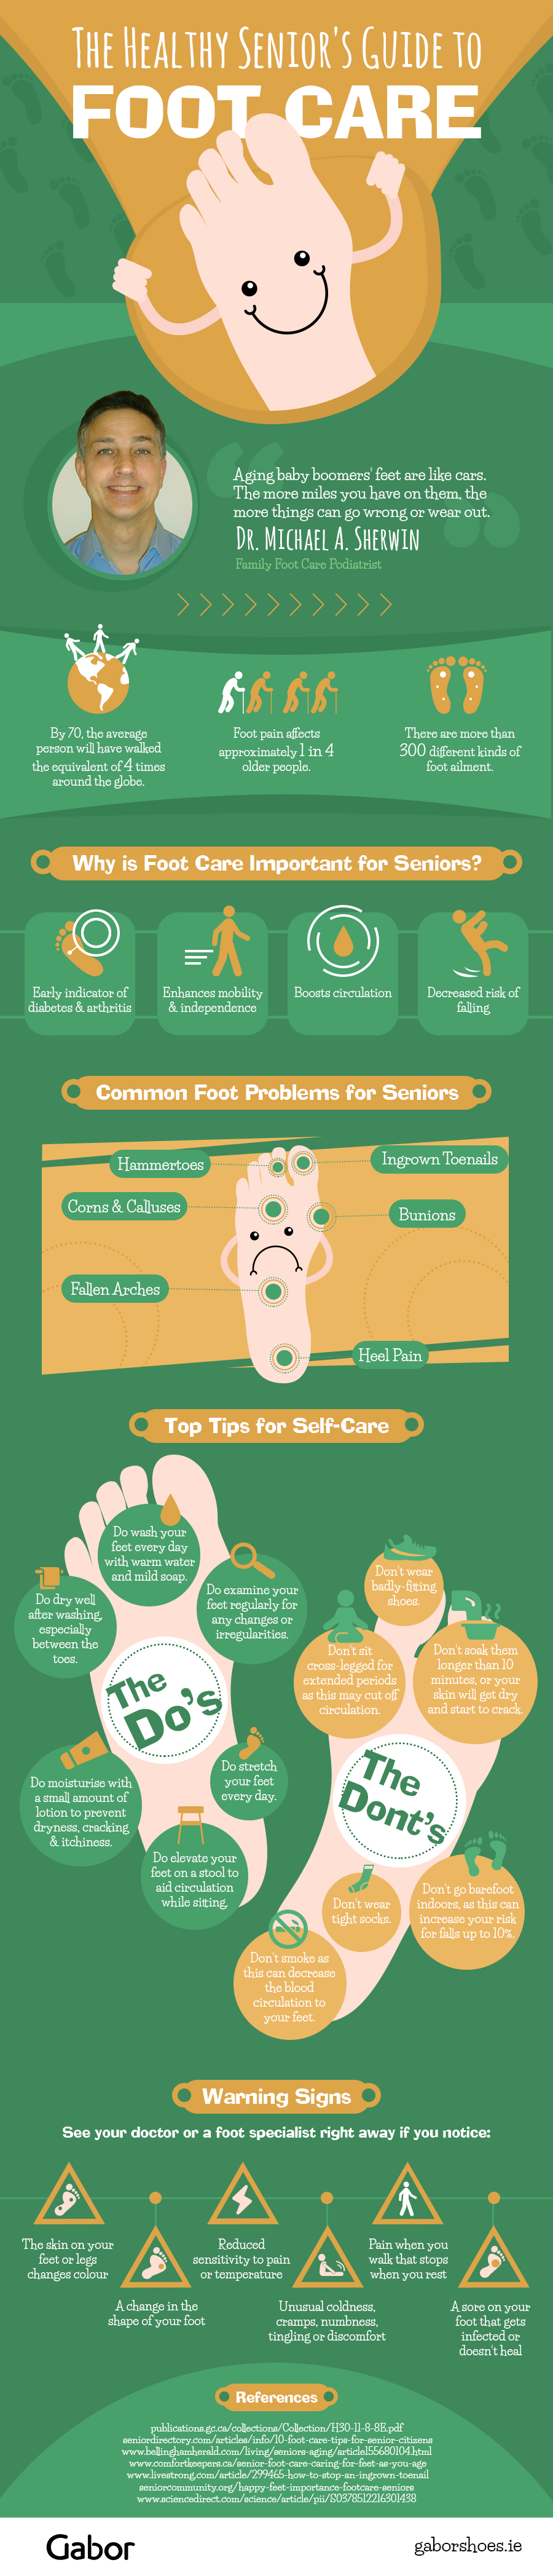 The Healthy Senior's Guide to Foot Care